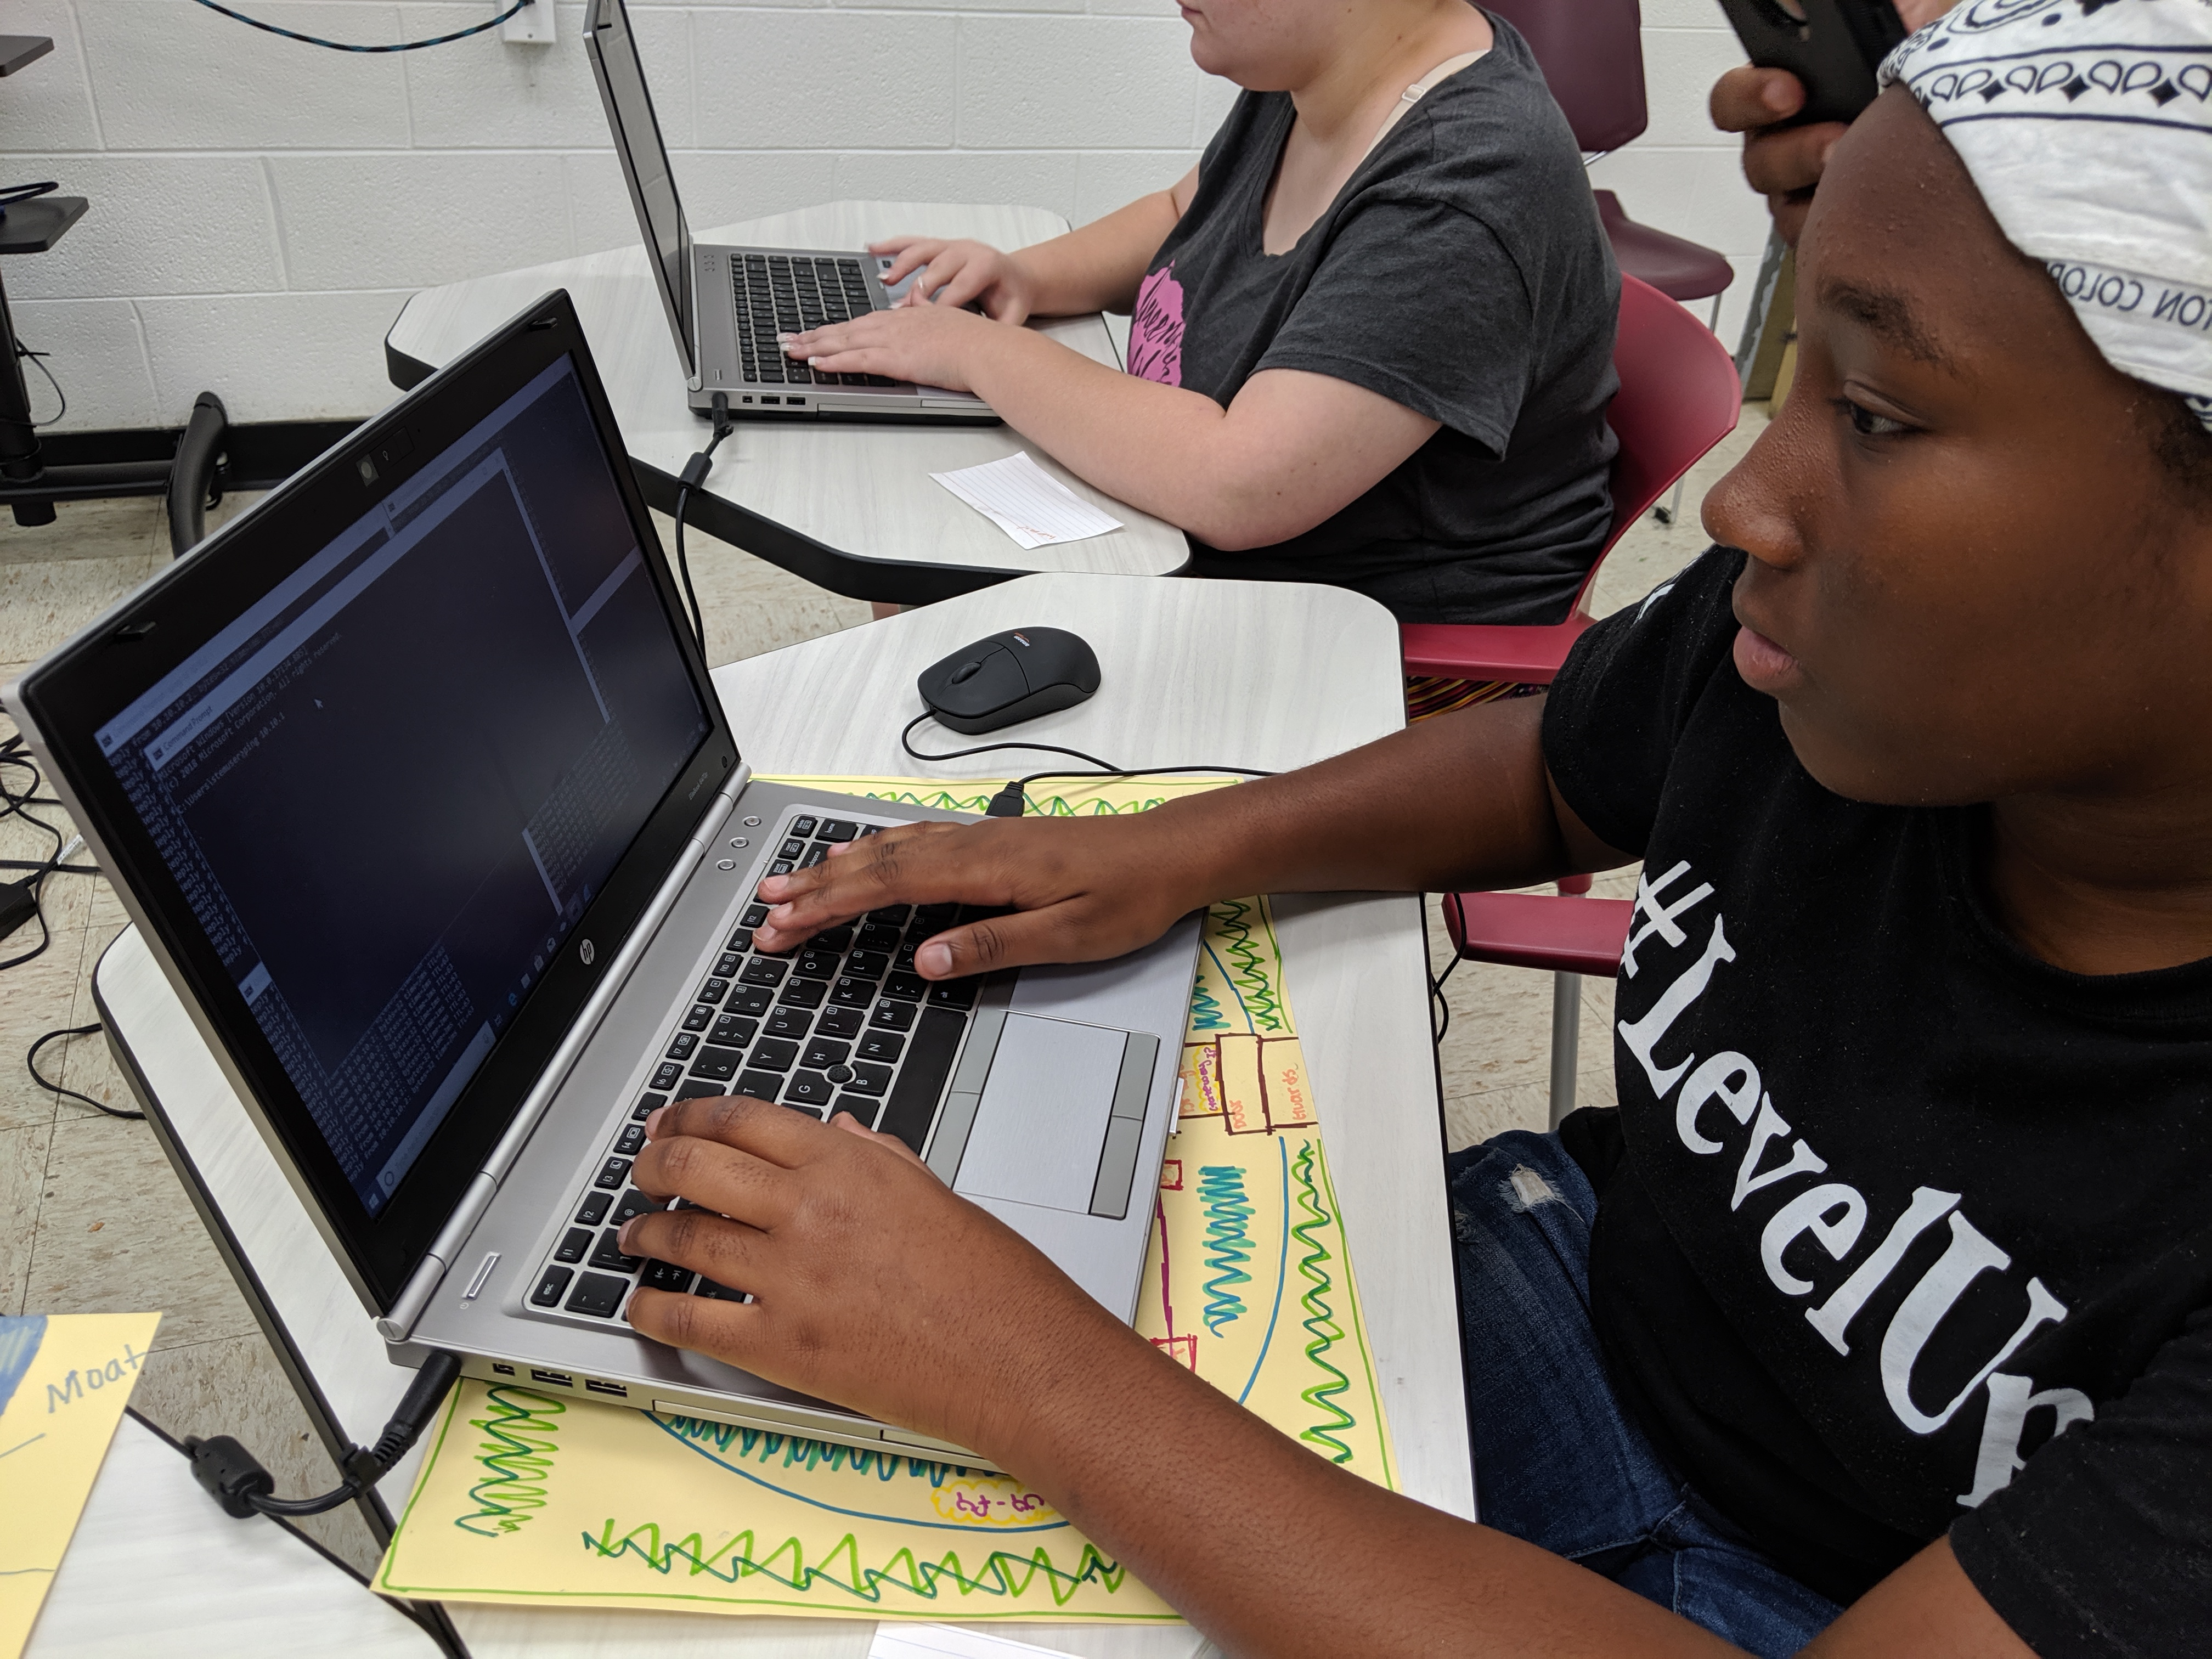  A STEAM Summer camp student views data from an attempted attack on a server